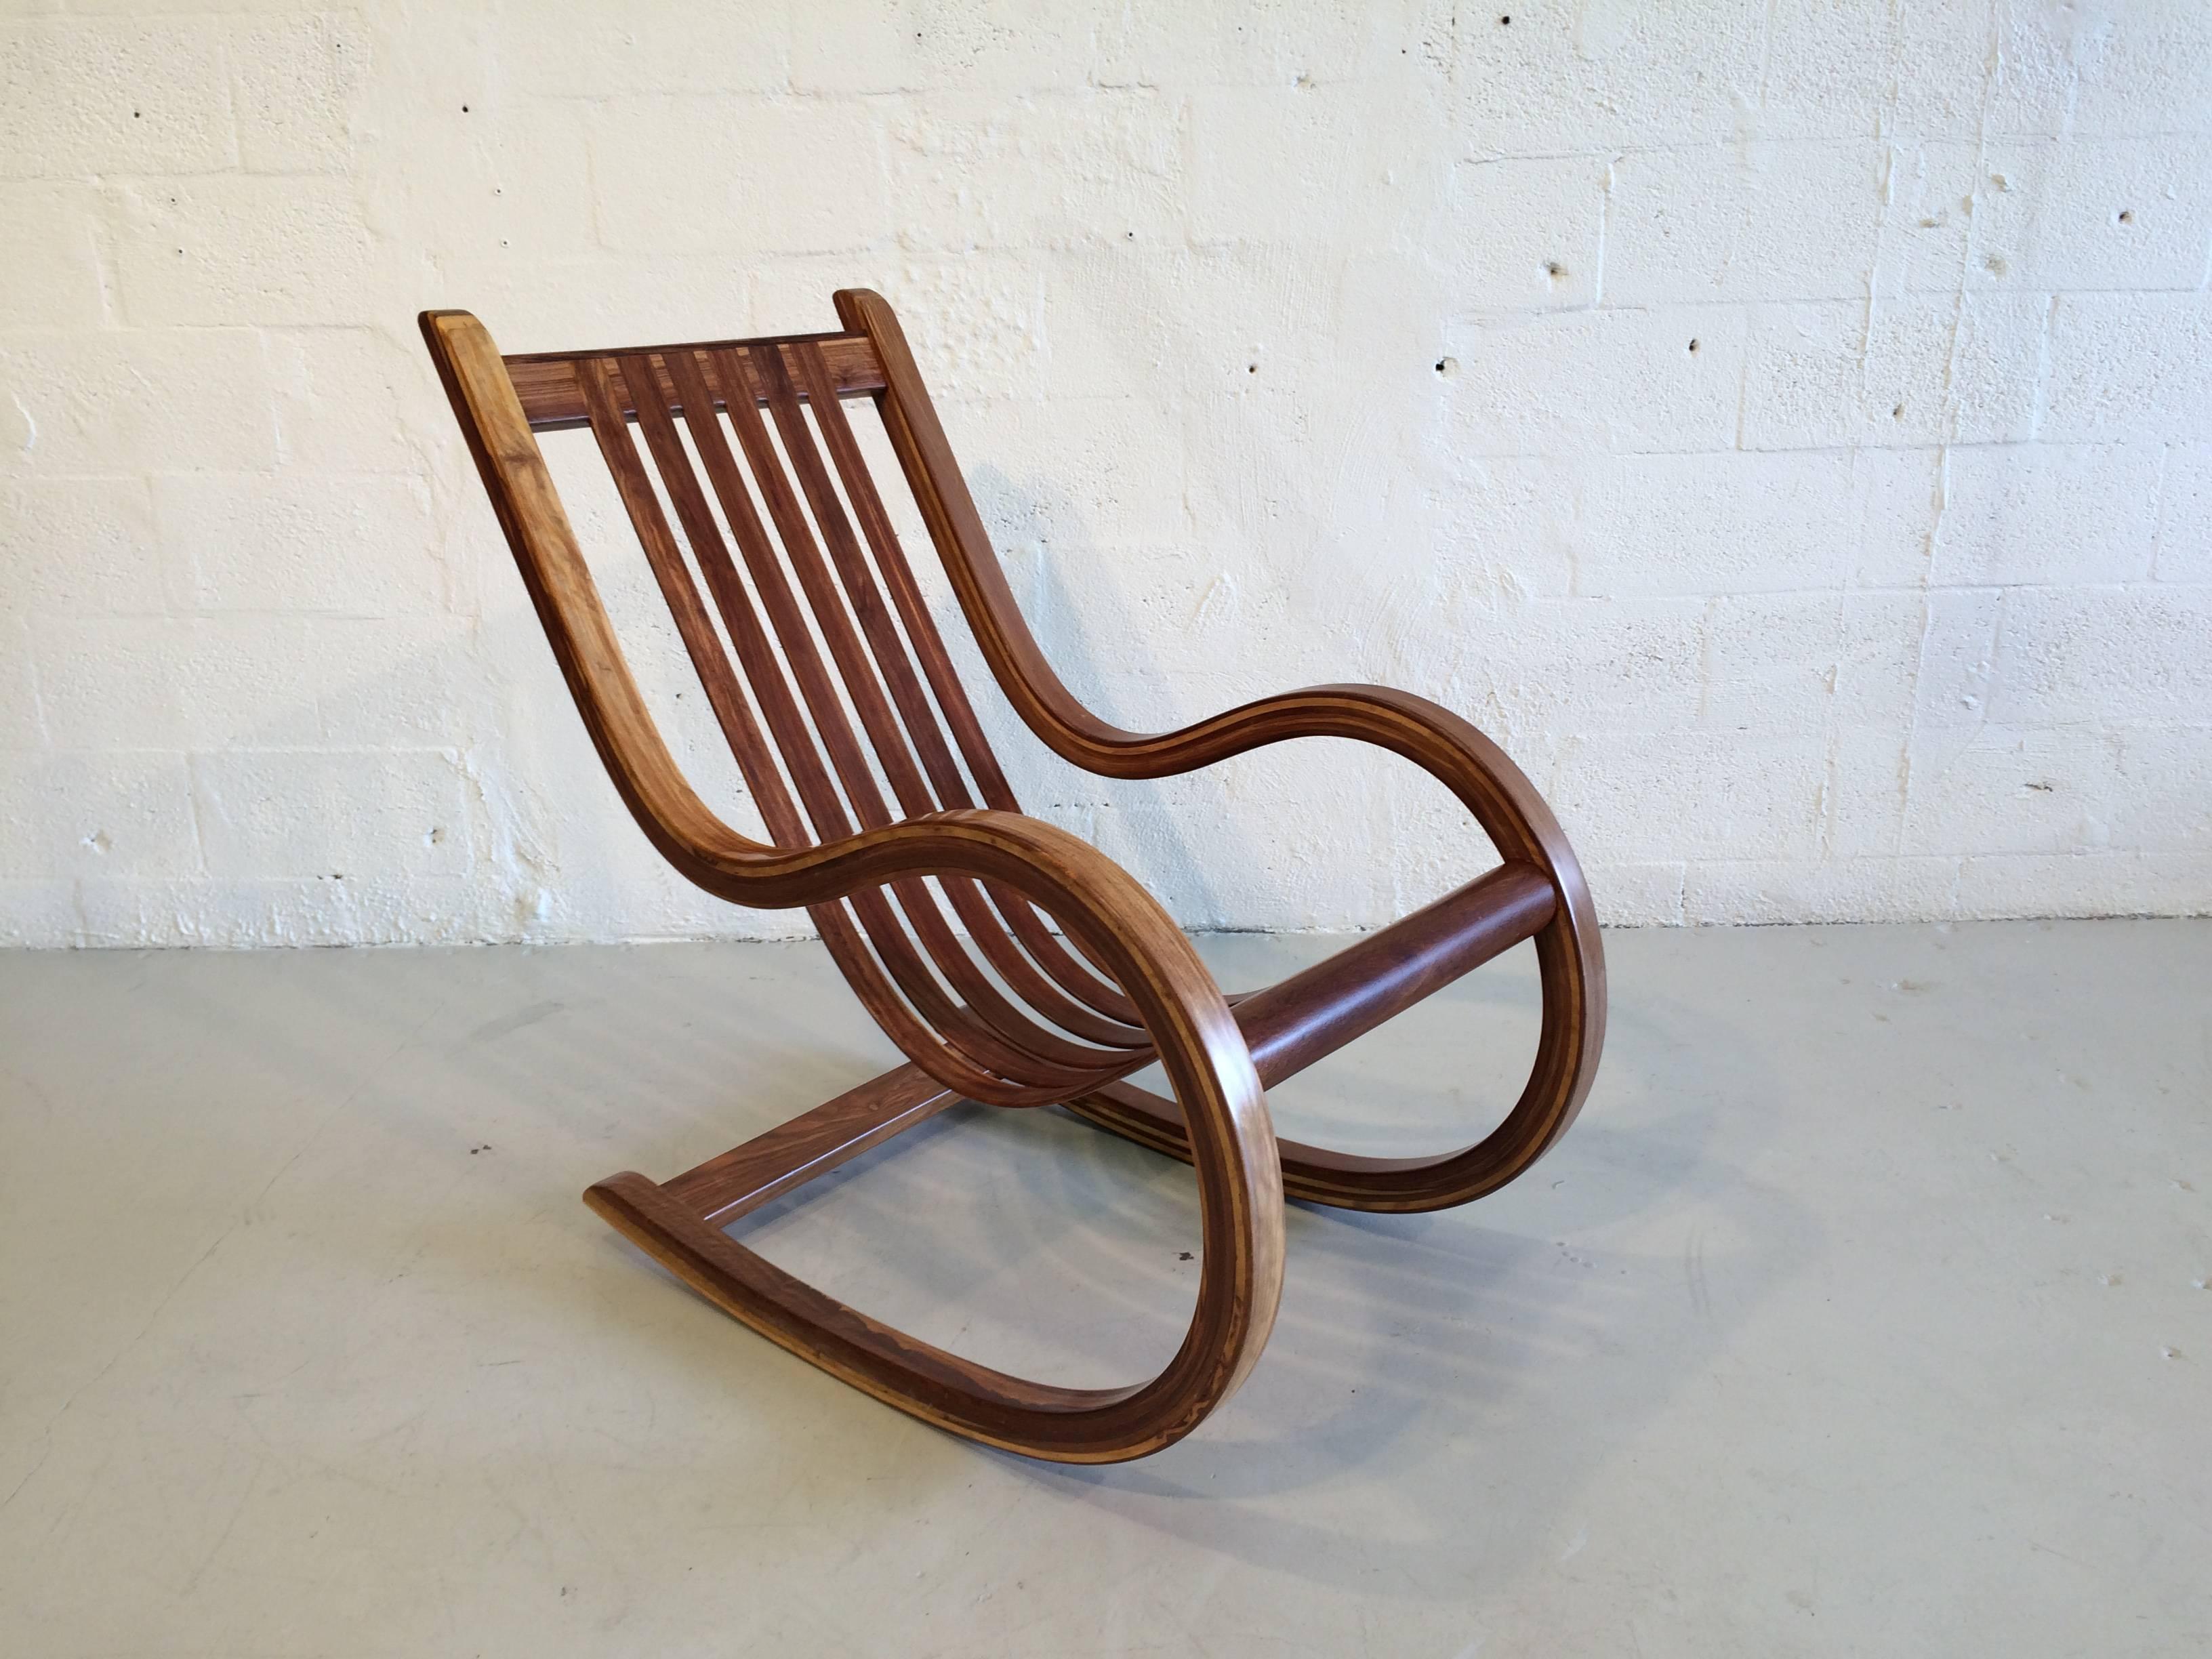 Modern Studio Crafted Rocking Chair, Mexico Rocker